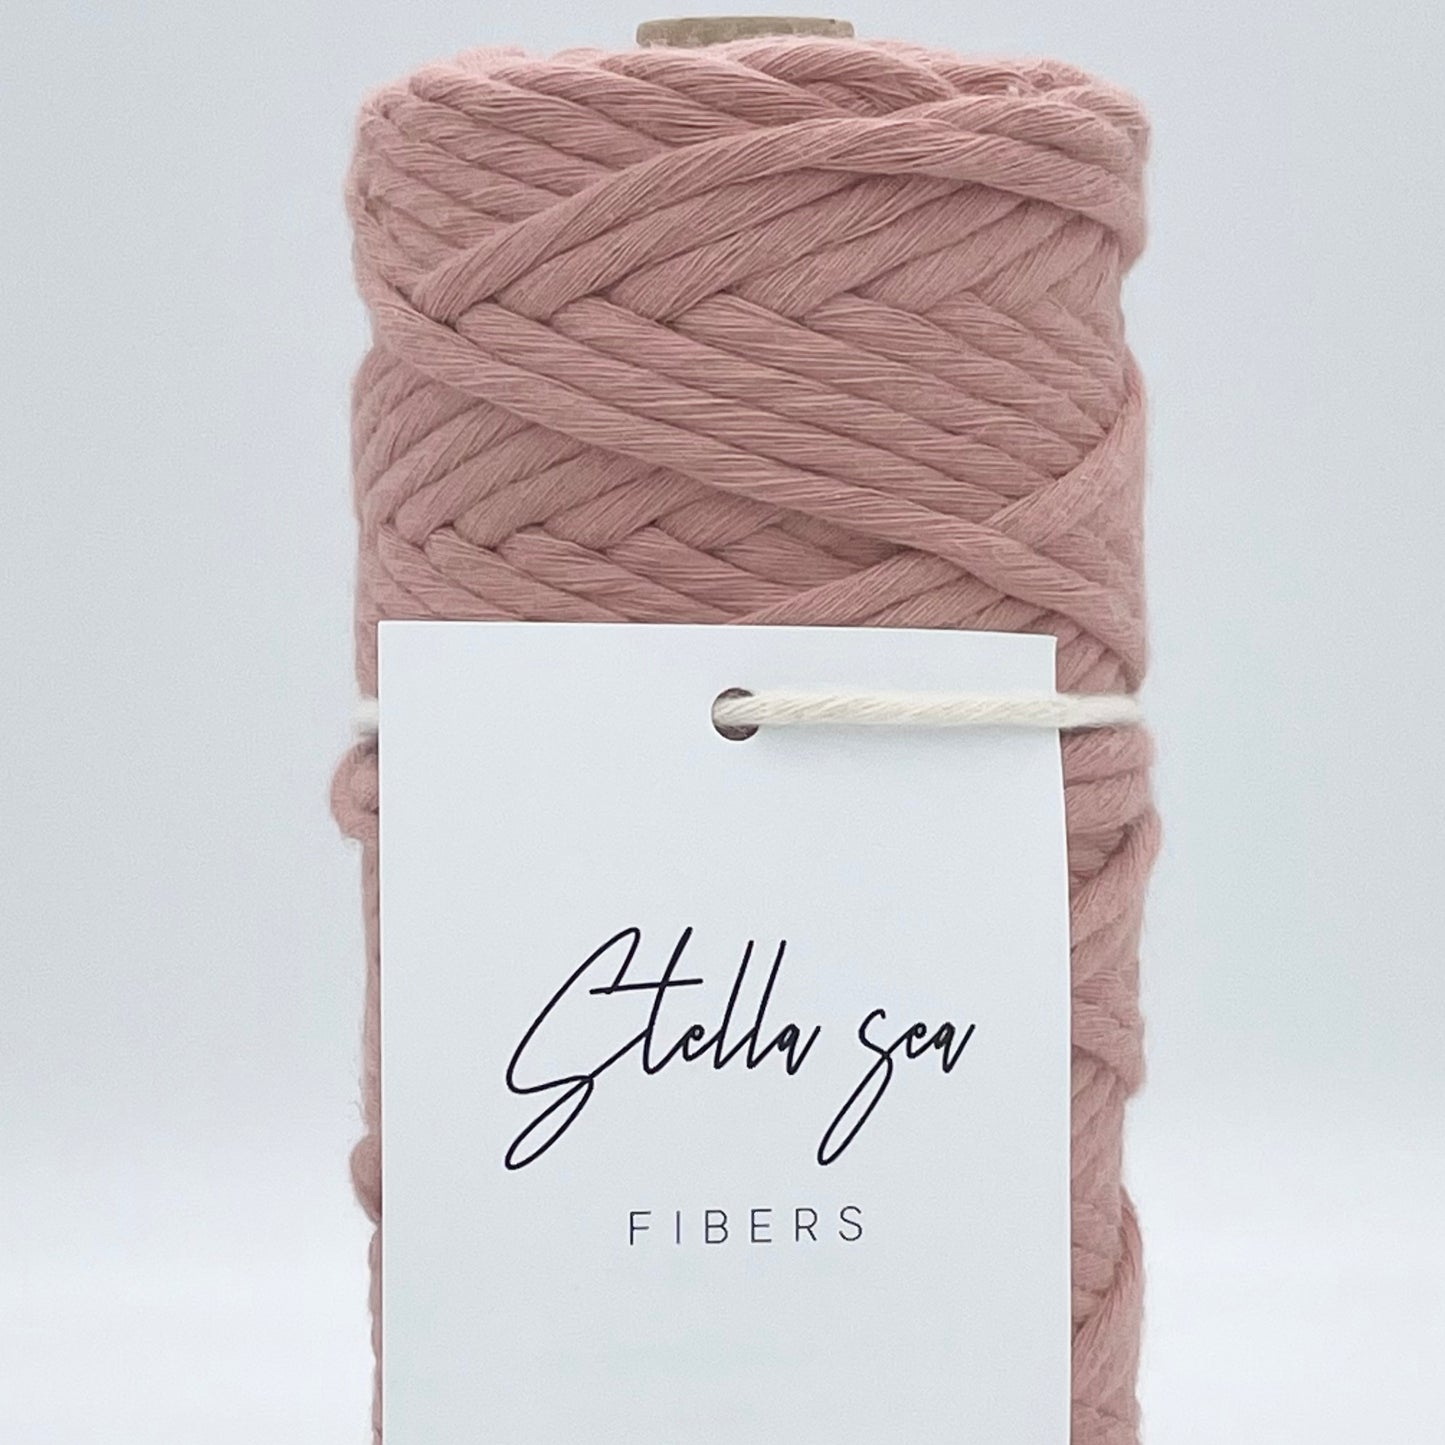 3.5mm/Color/100m (about 250g) Single-Strand fair trade organic cotton macrame color cord made in Japan